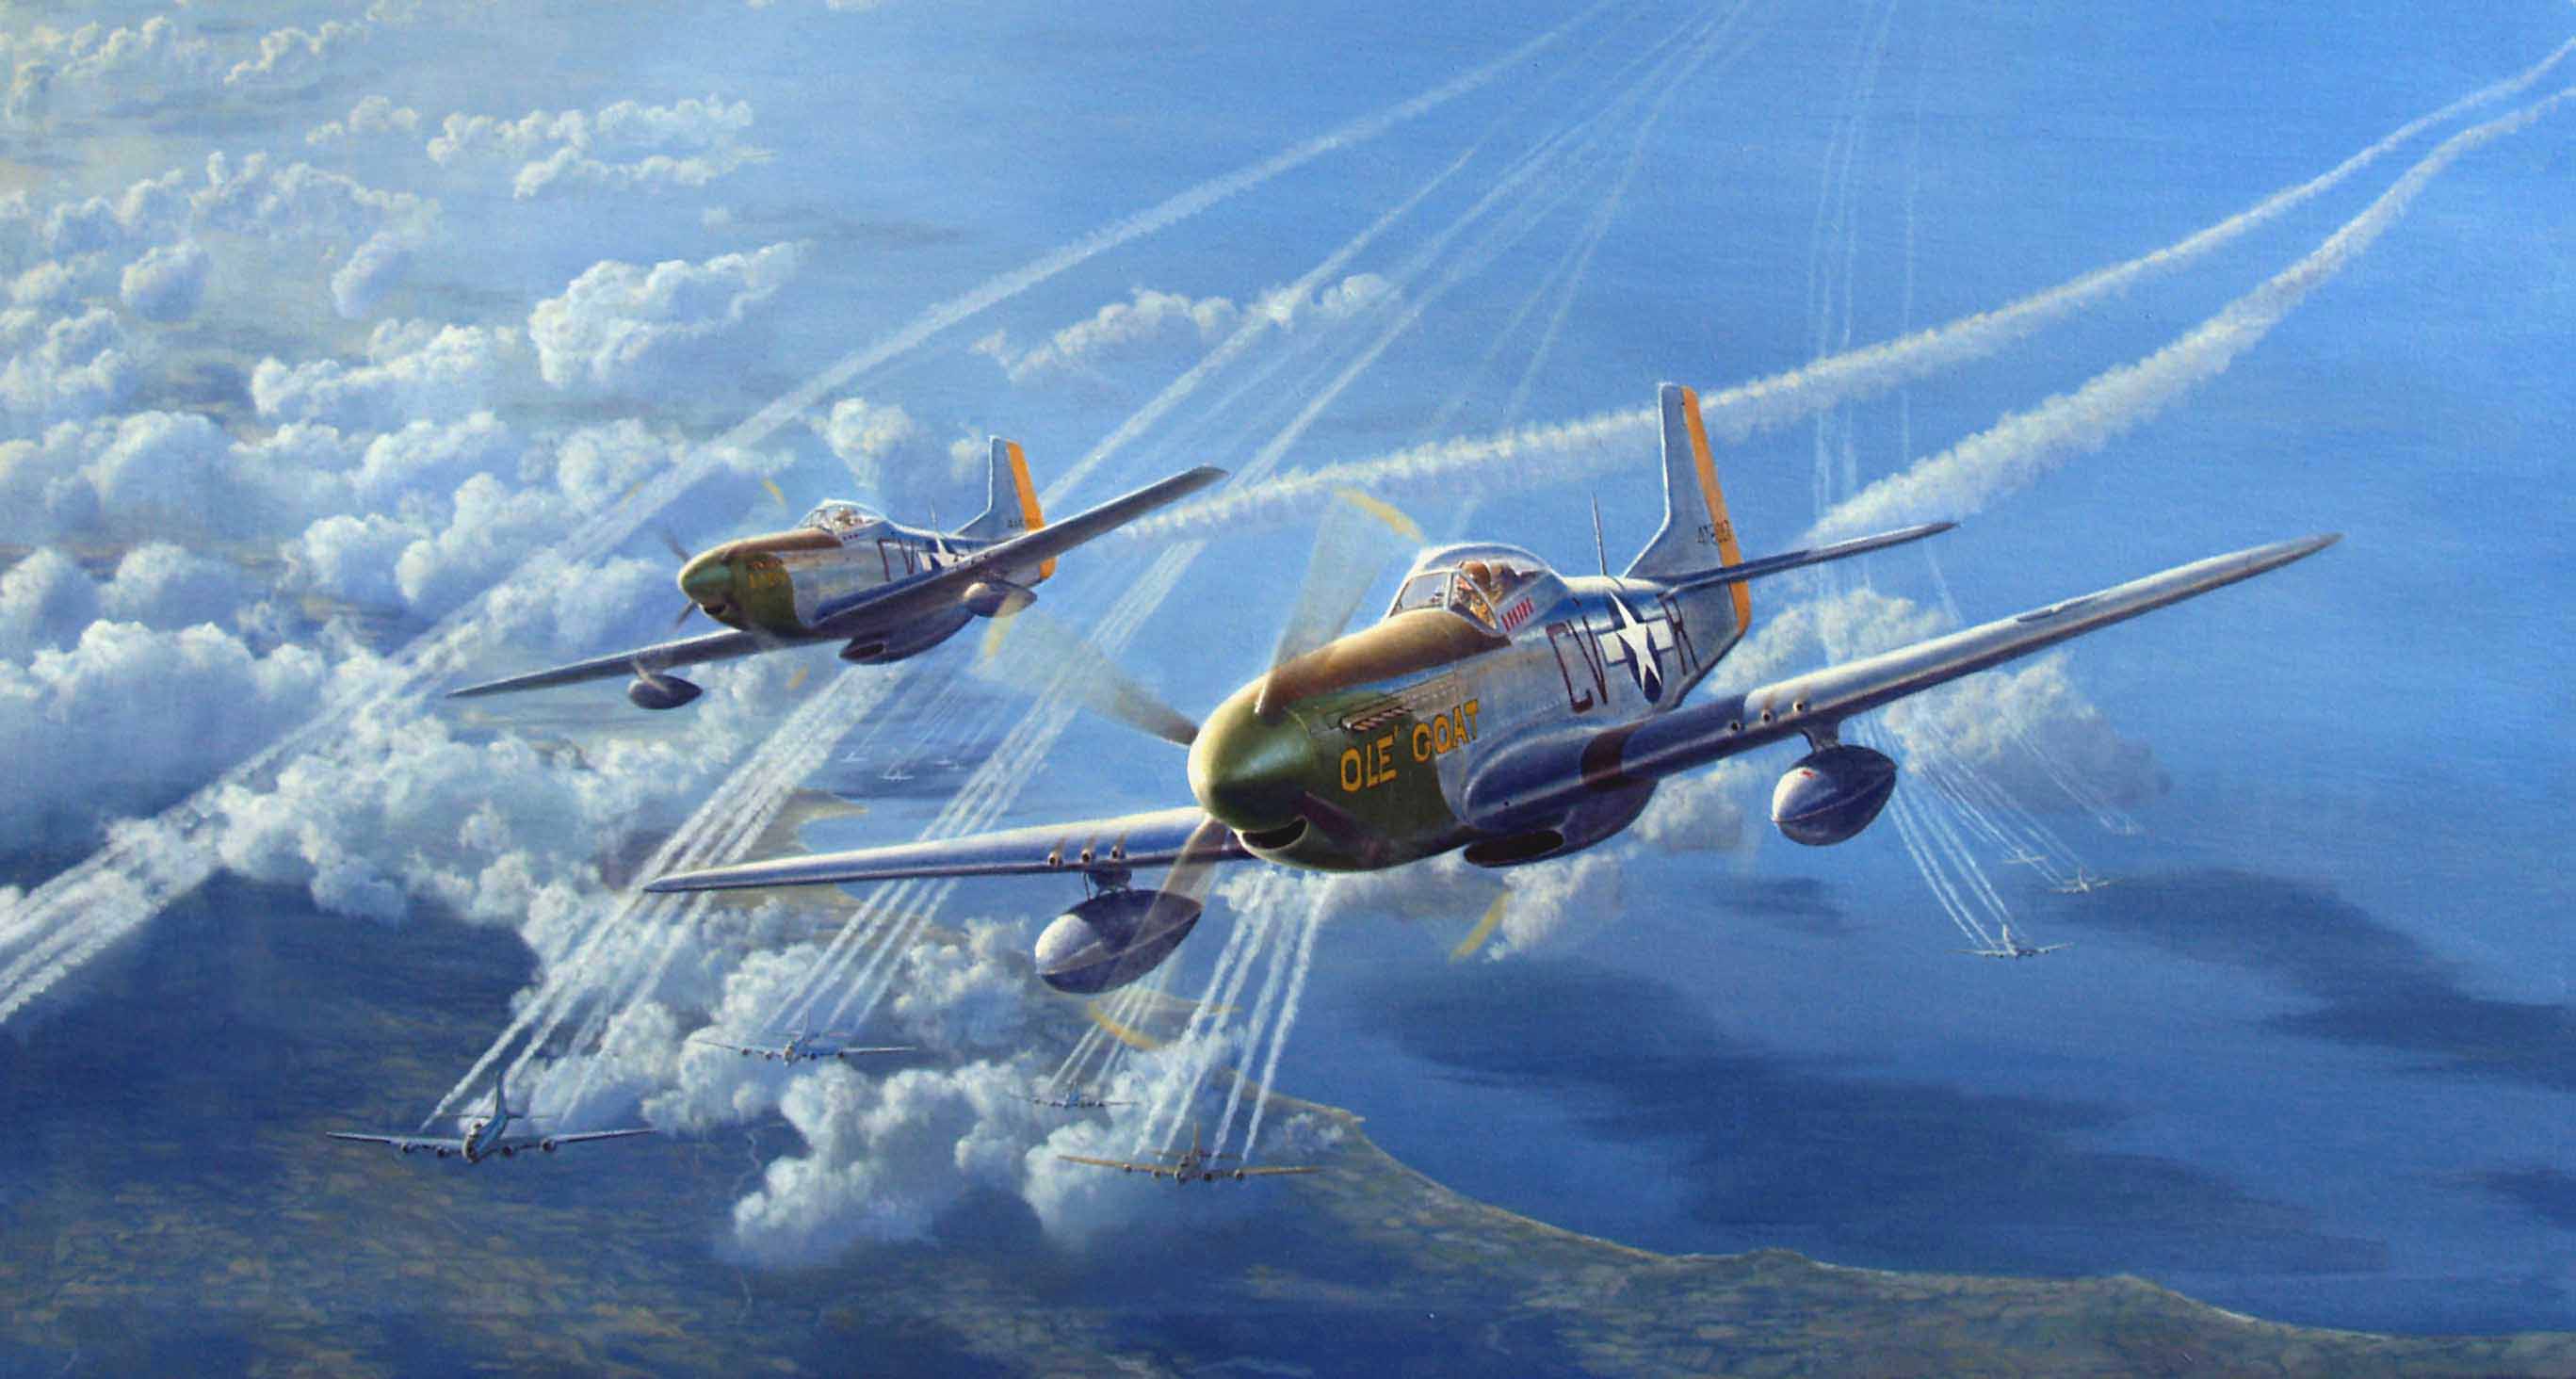 24 North American P-51 Mustang HD Wallpapers | Backgrounds ...